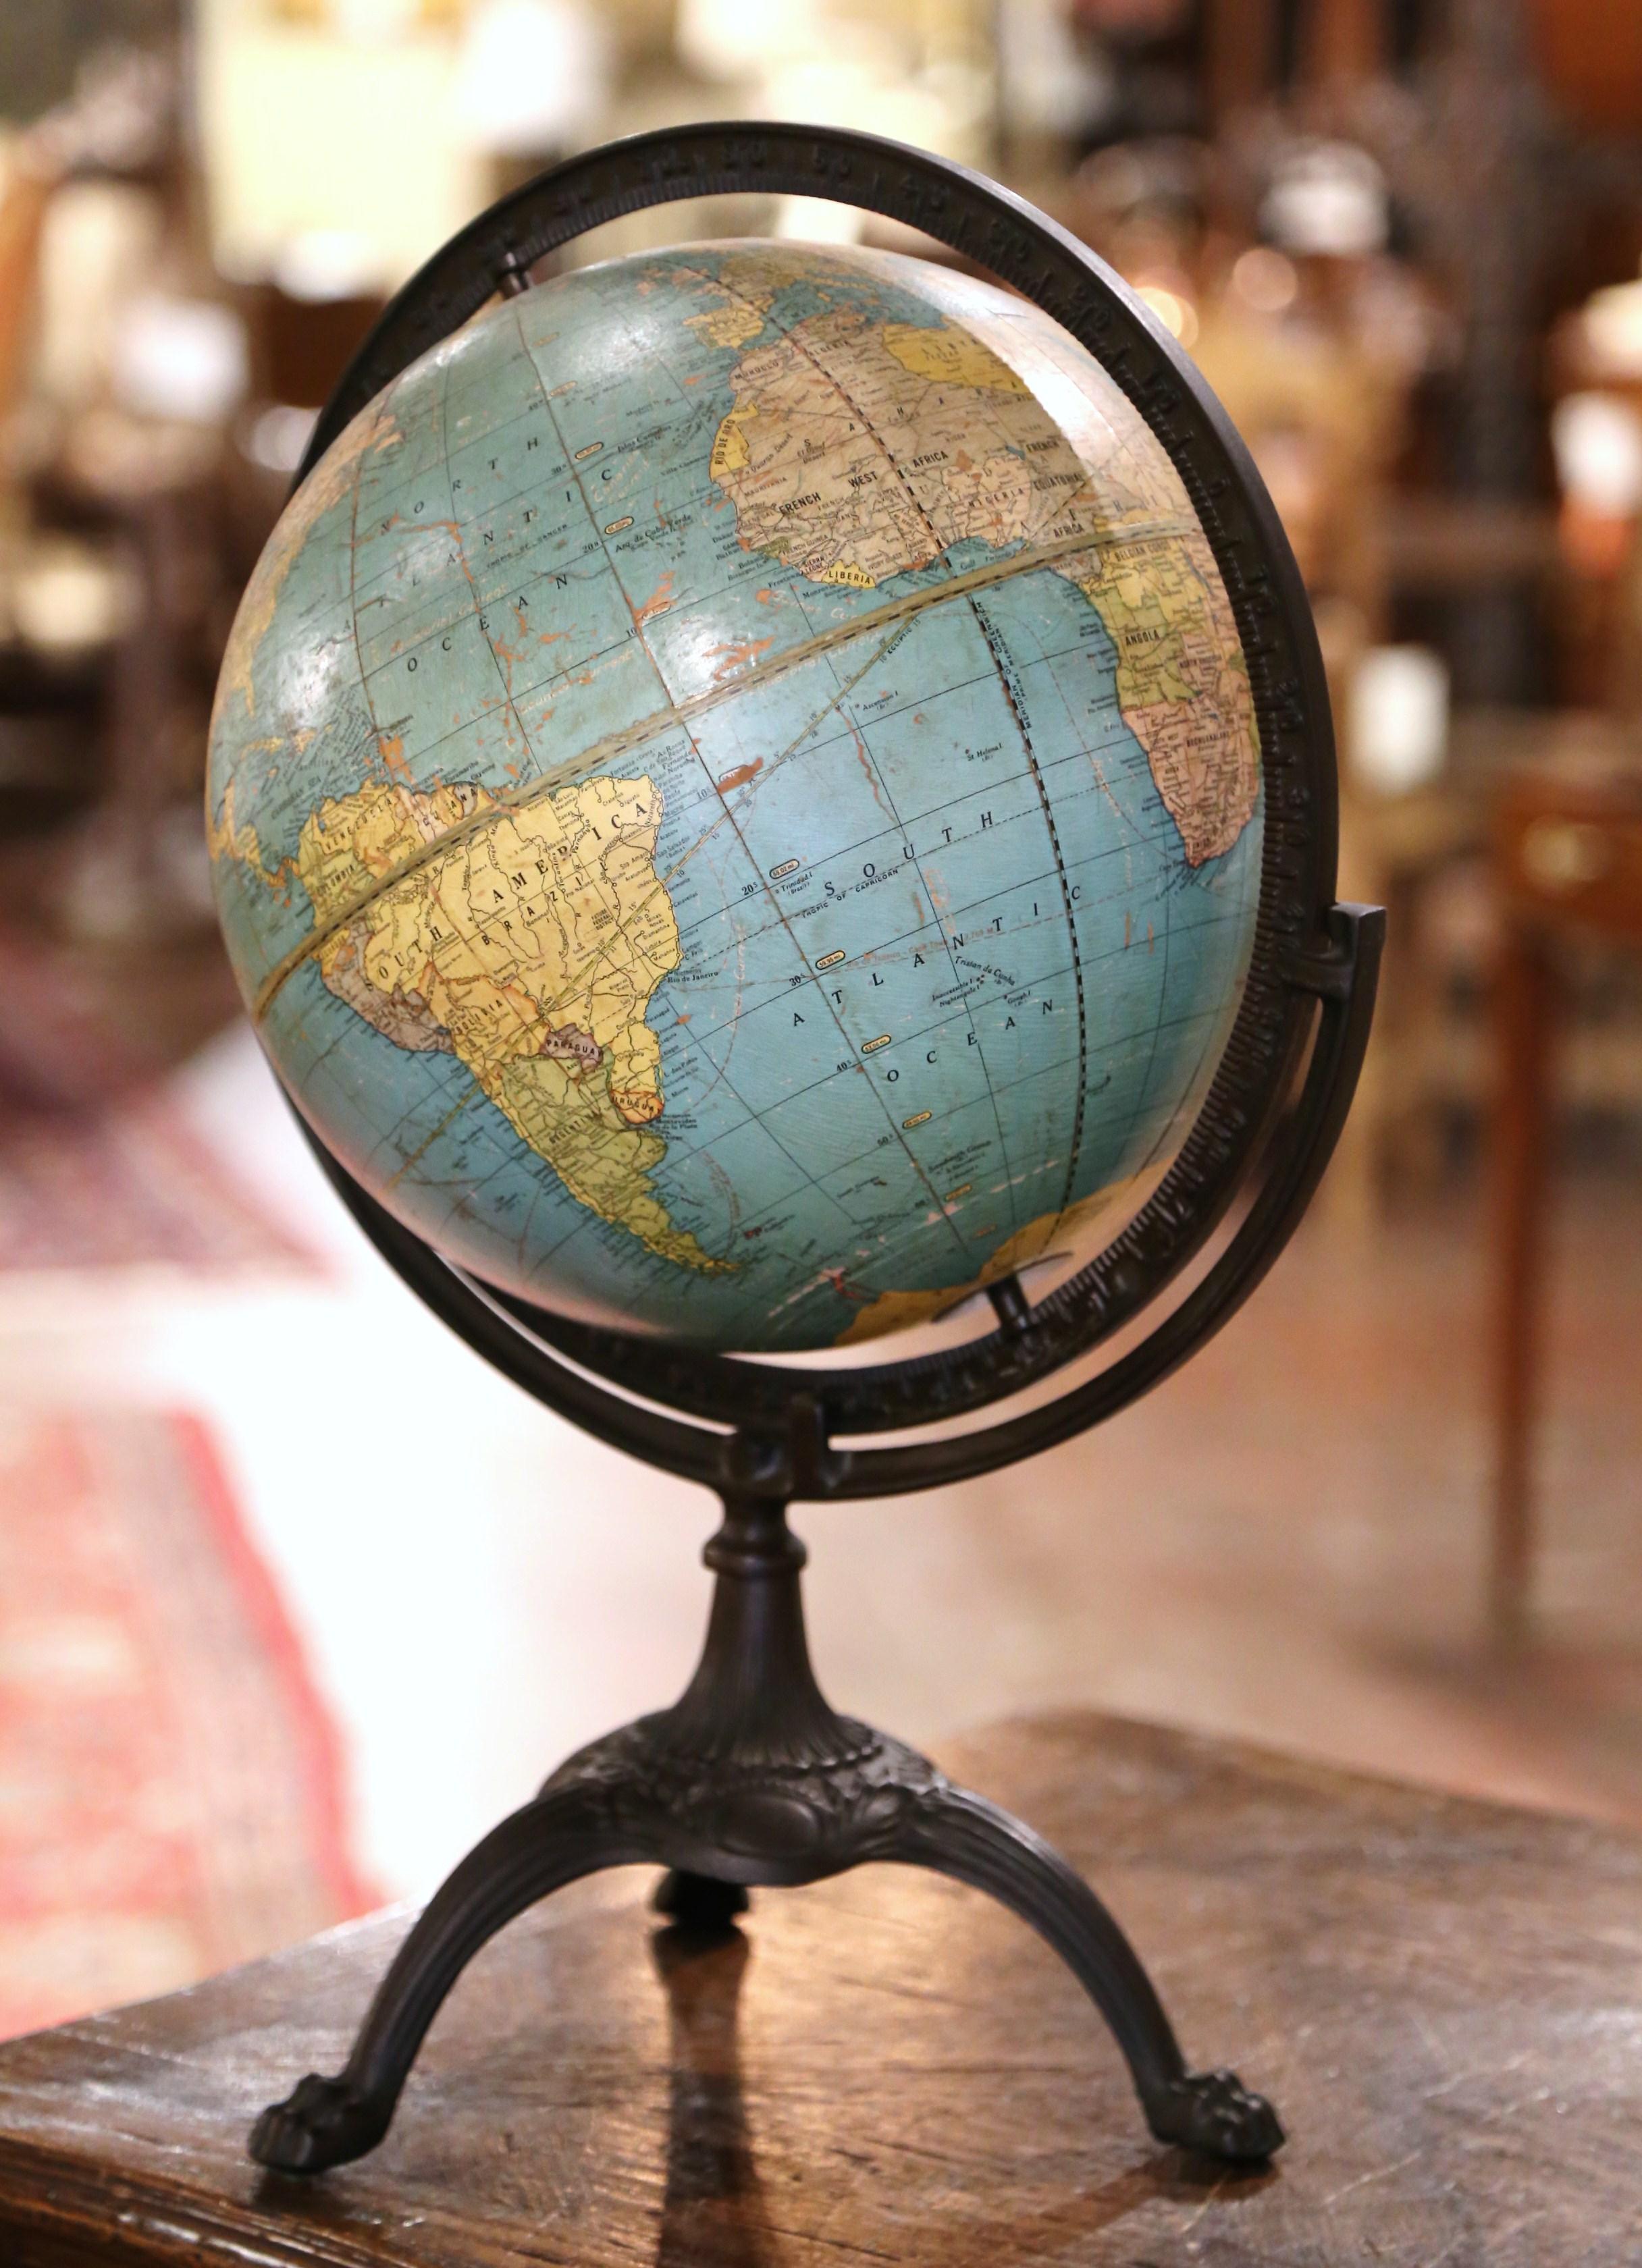 cram's imperial world globe on stand